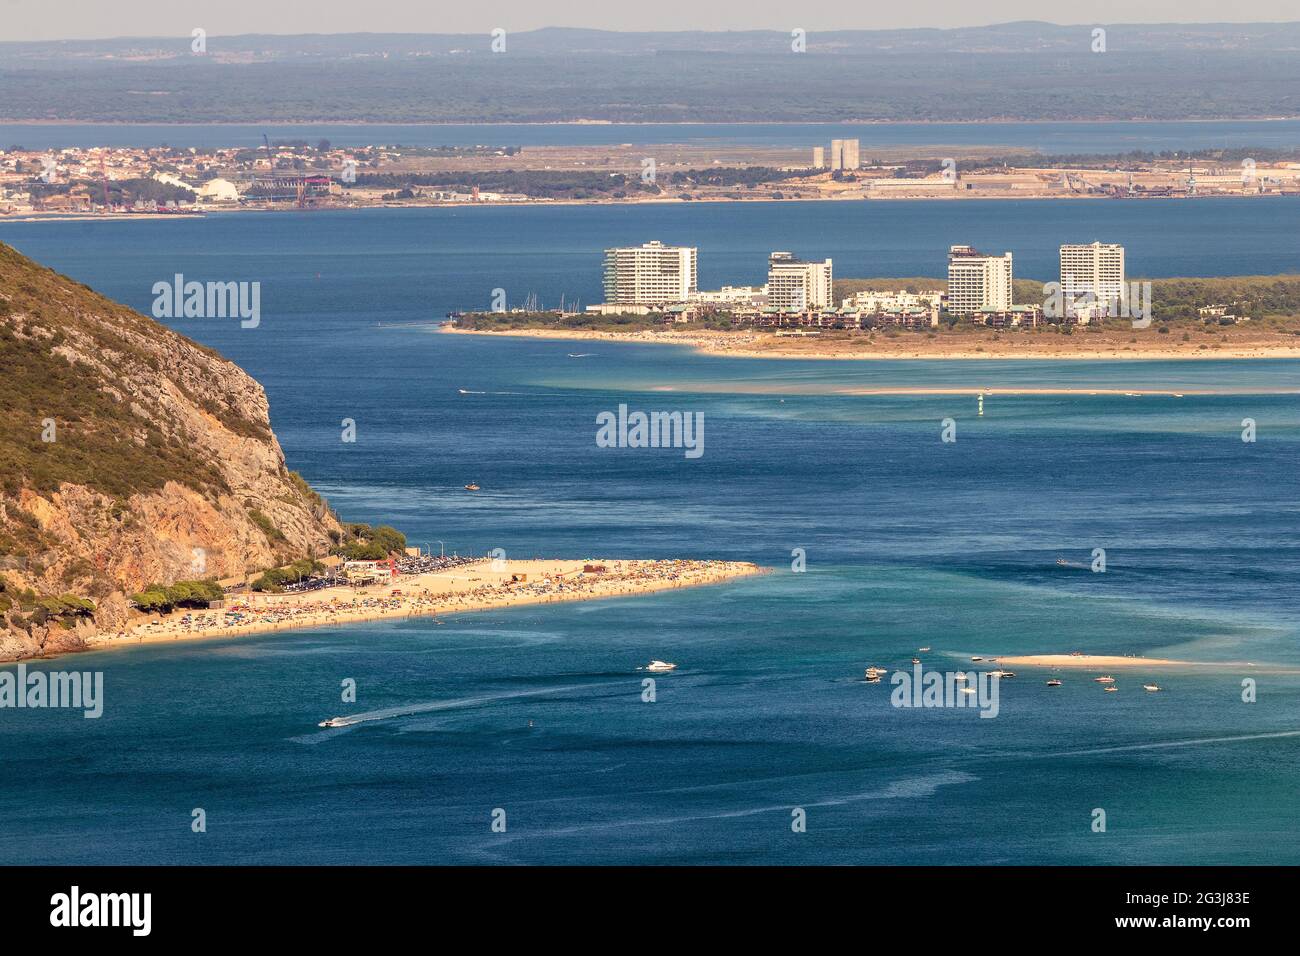 Beautiful landscape of the mouth of the Sado river in Portugal, with Figueirinha beach in the foreground and the tourist resort of Troia in background. Stock Photo